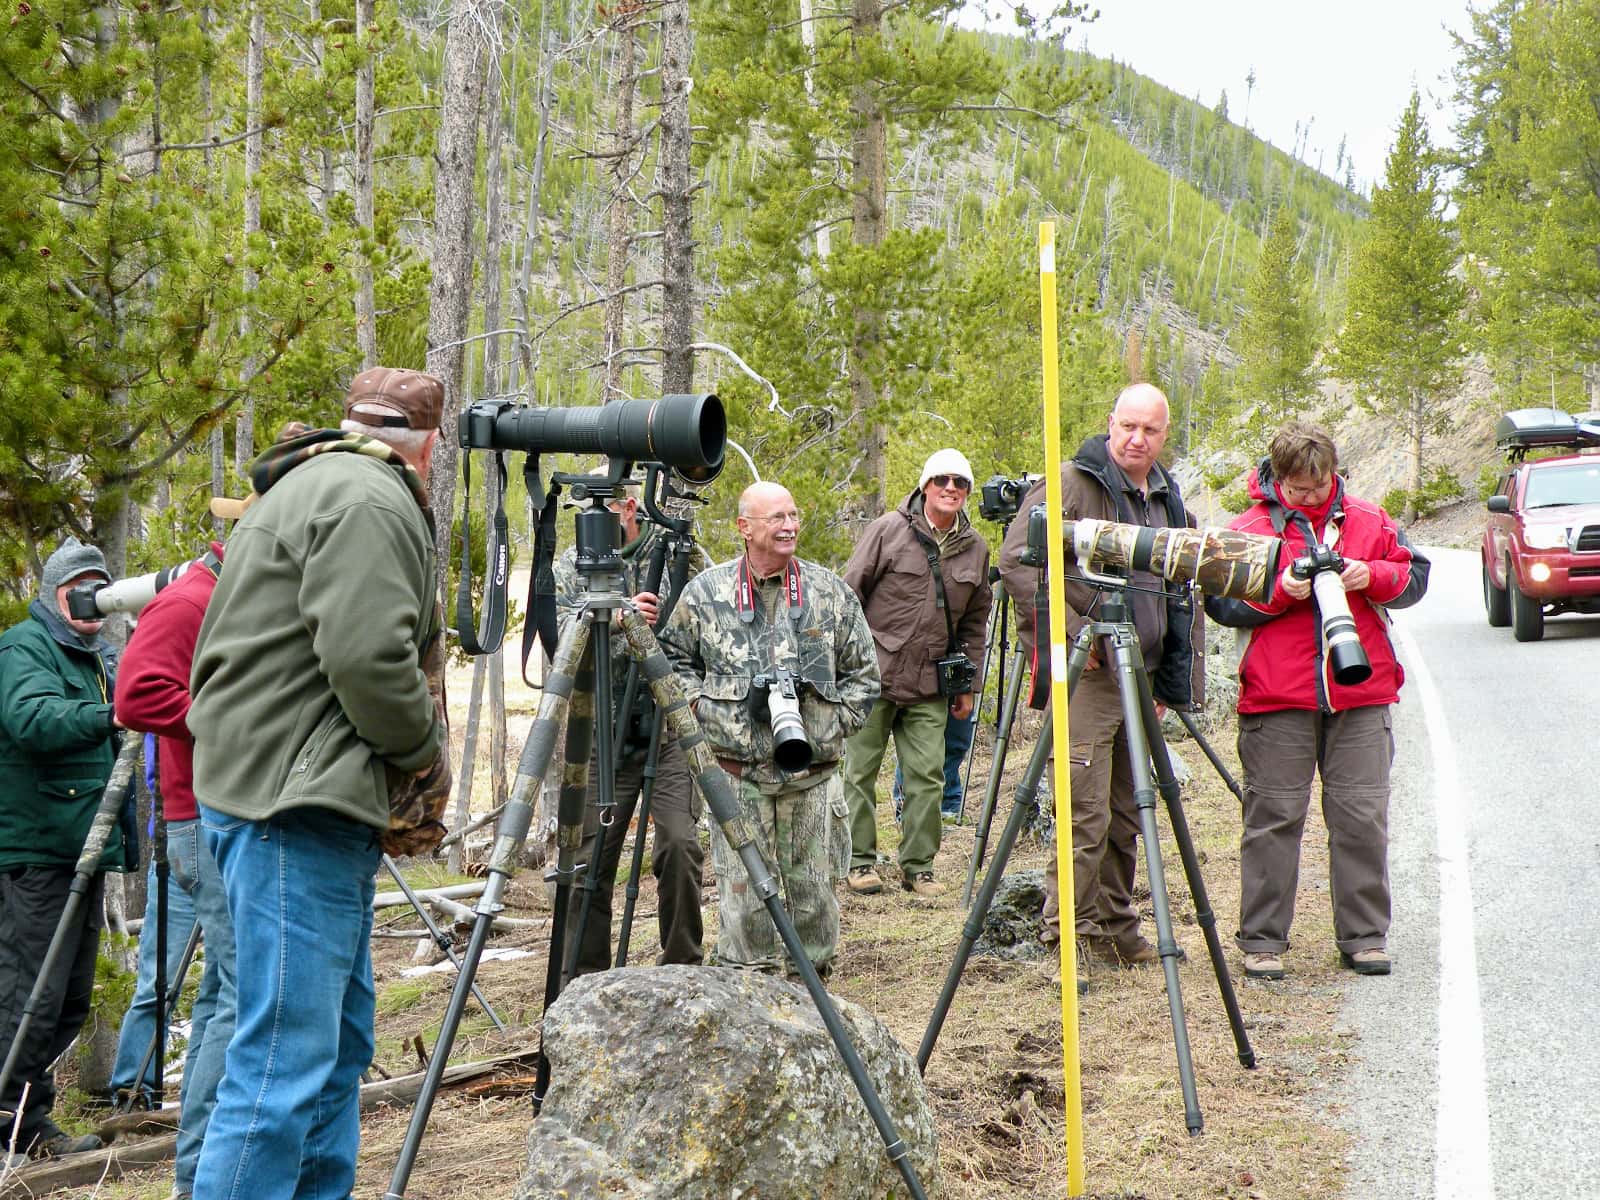 Group of photographers standing on roadside